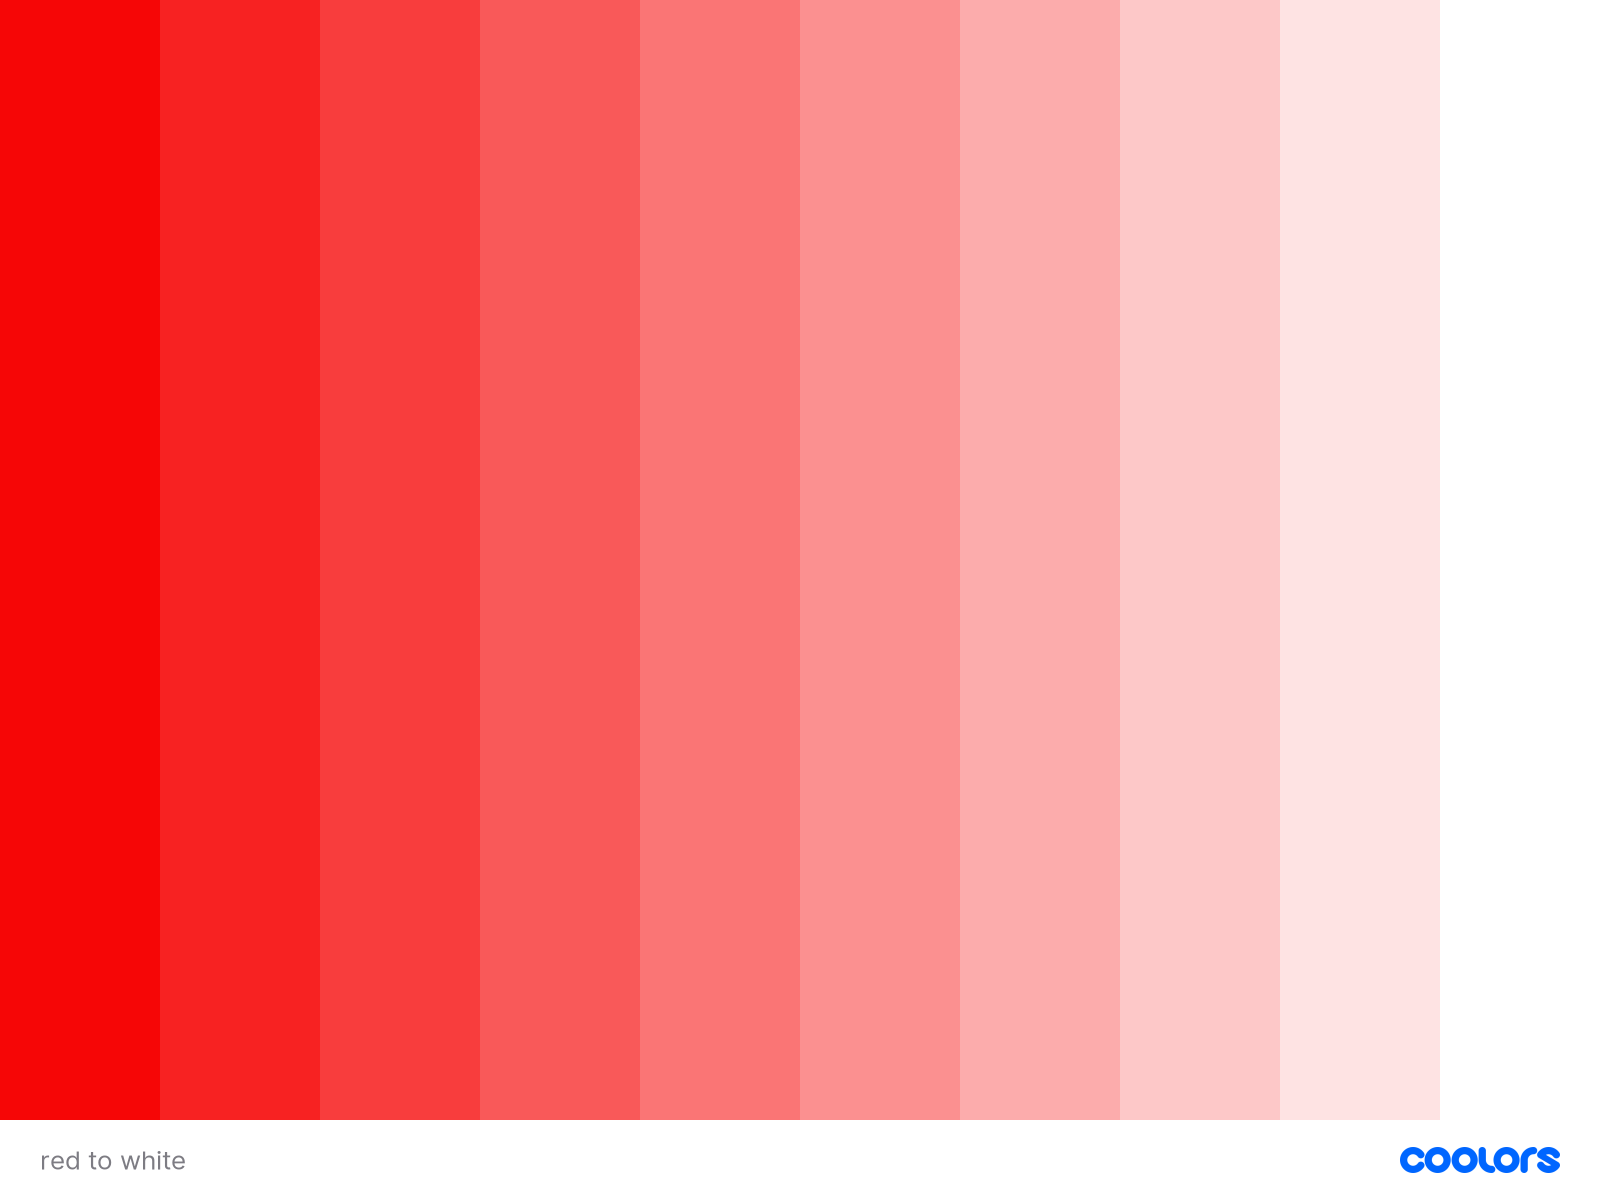 red to white (1).png